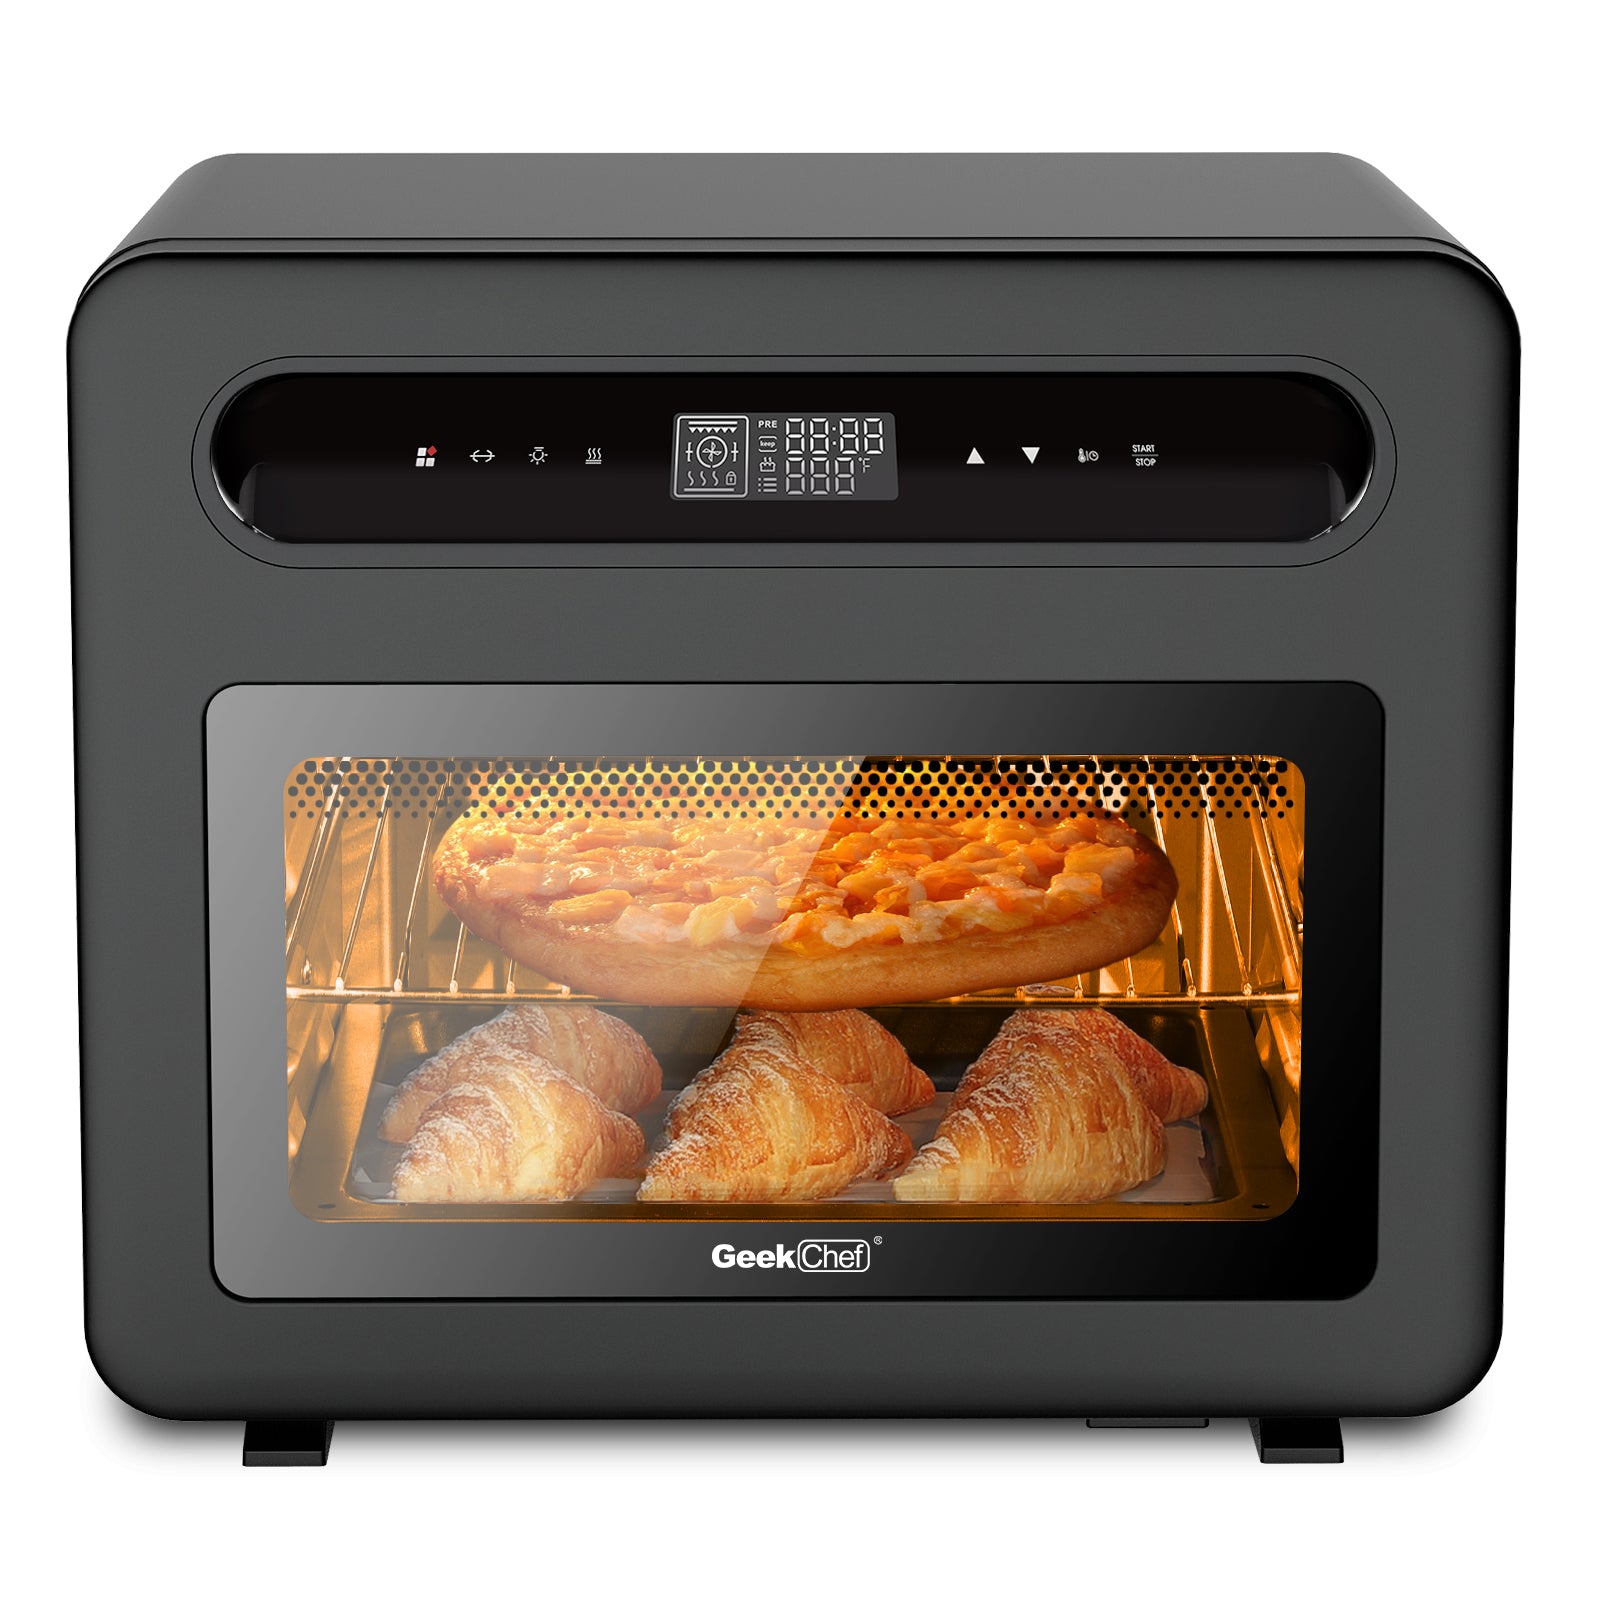 10-in-1 Air Fryer Oven, 20QT Toaster Oven Air Fryer Combo, Digital LCD  Touch Screen, 6-Slice Toast, Air Fry, Roast, Bake, Dehydrates, Reheat,  Oil-Free